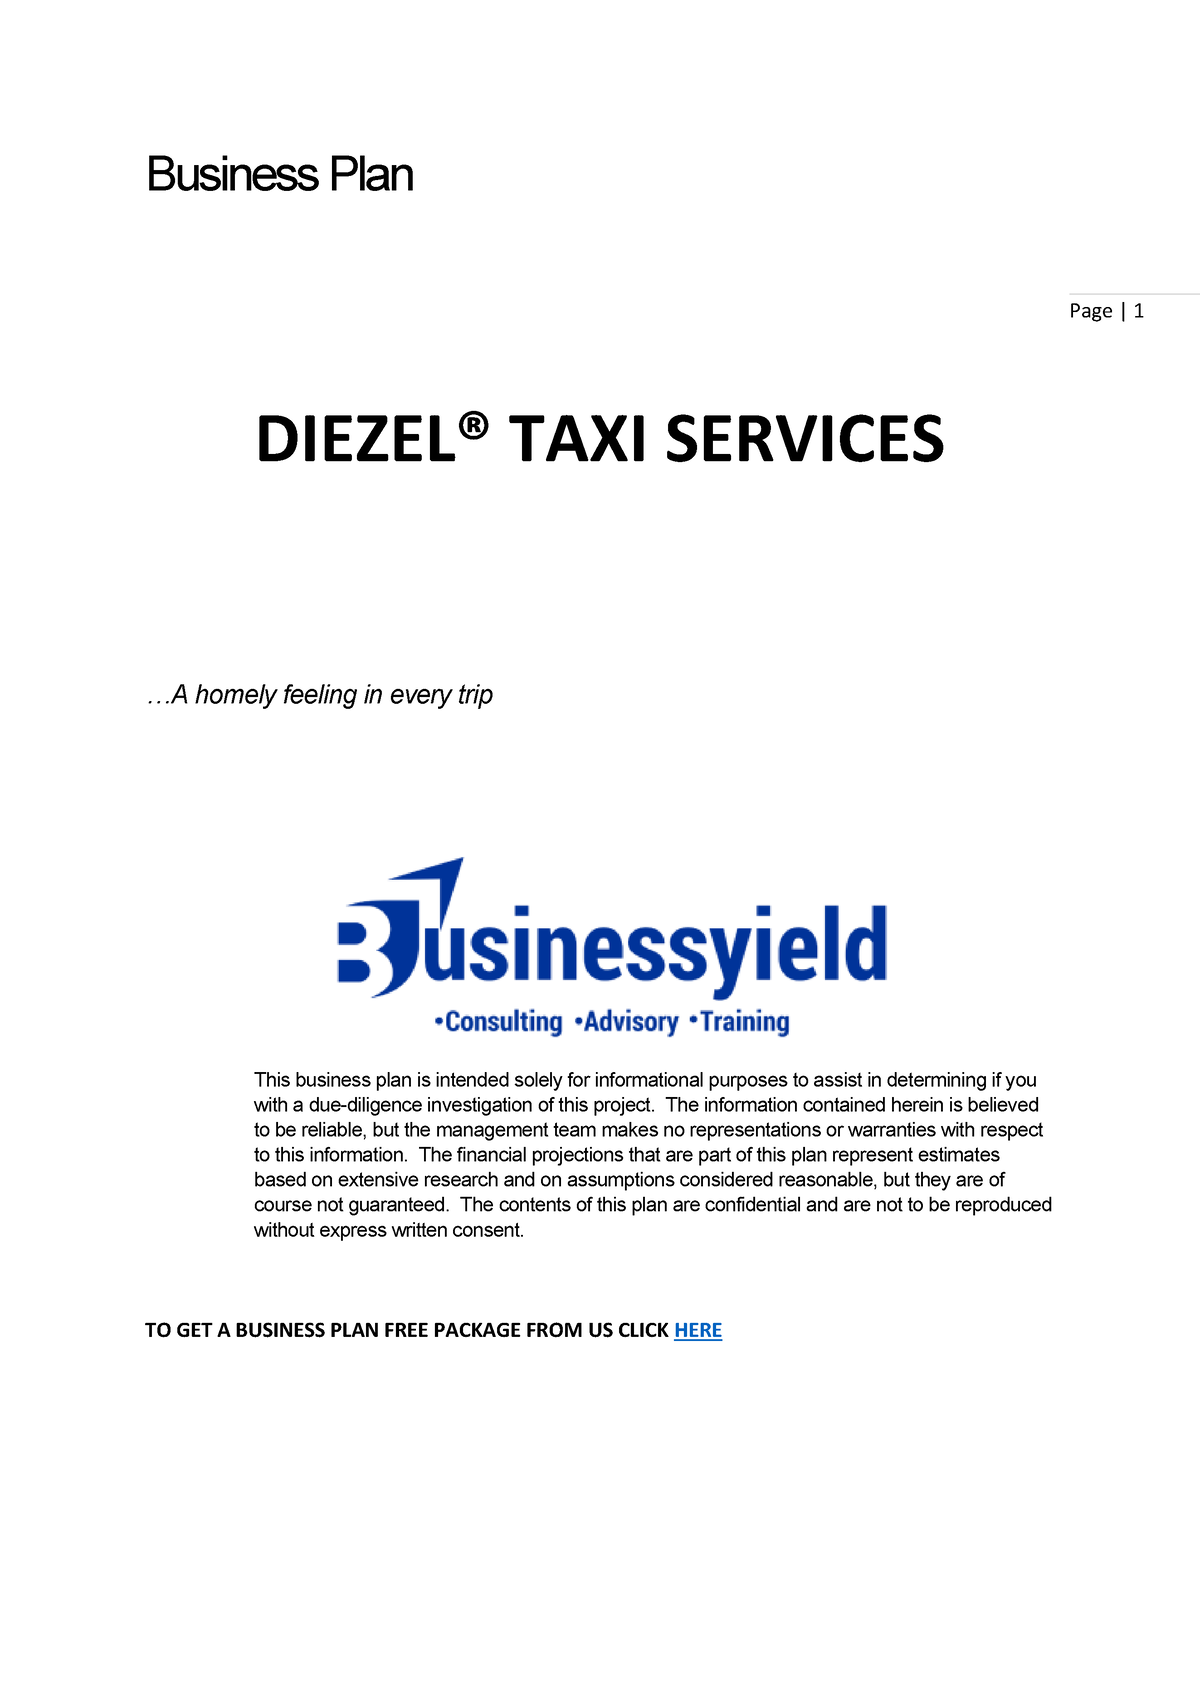 business plan for a taxi business